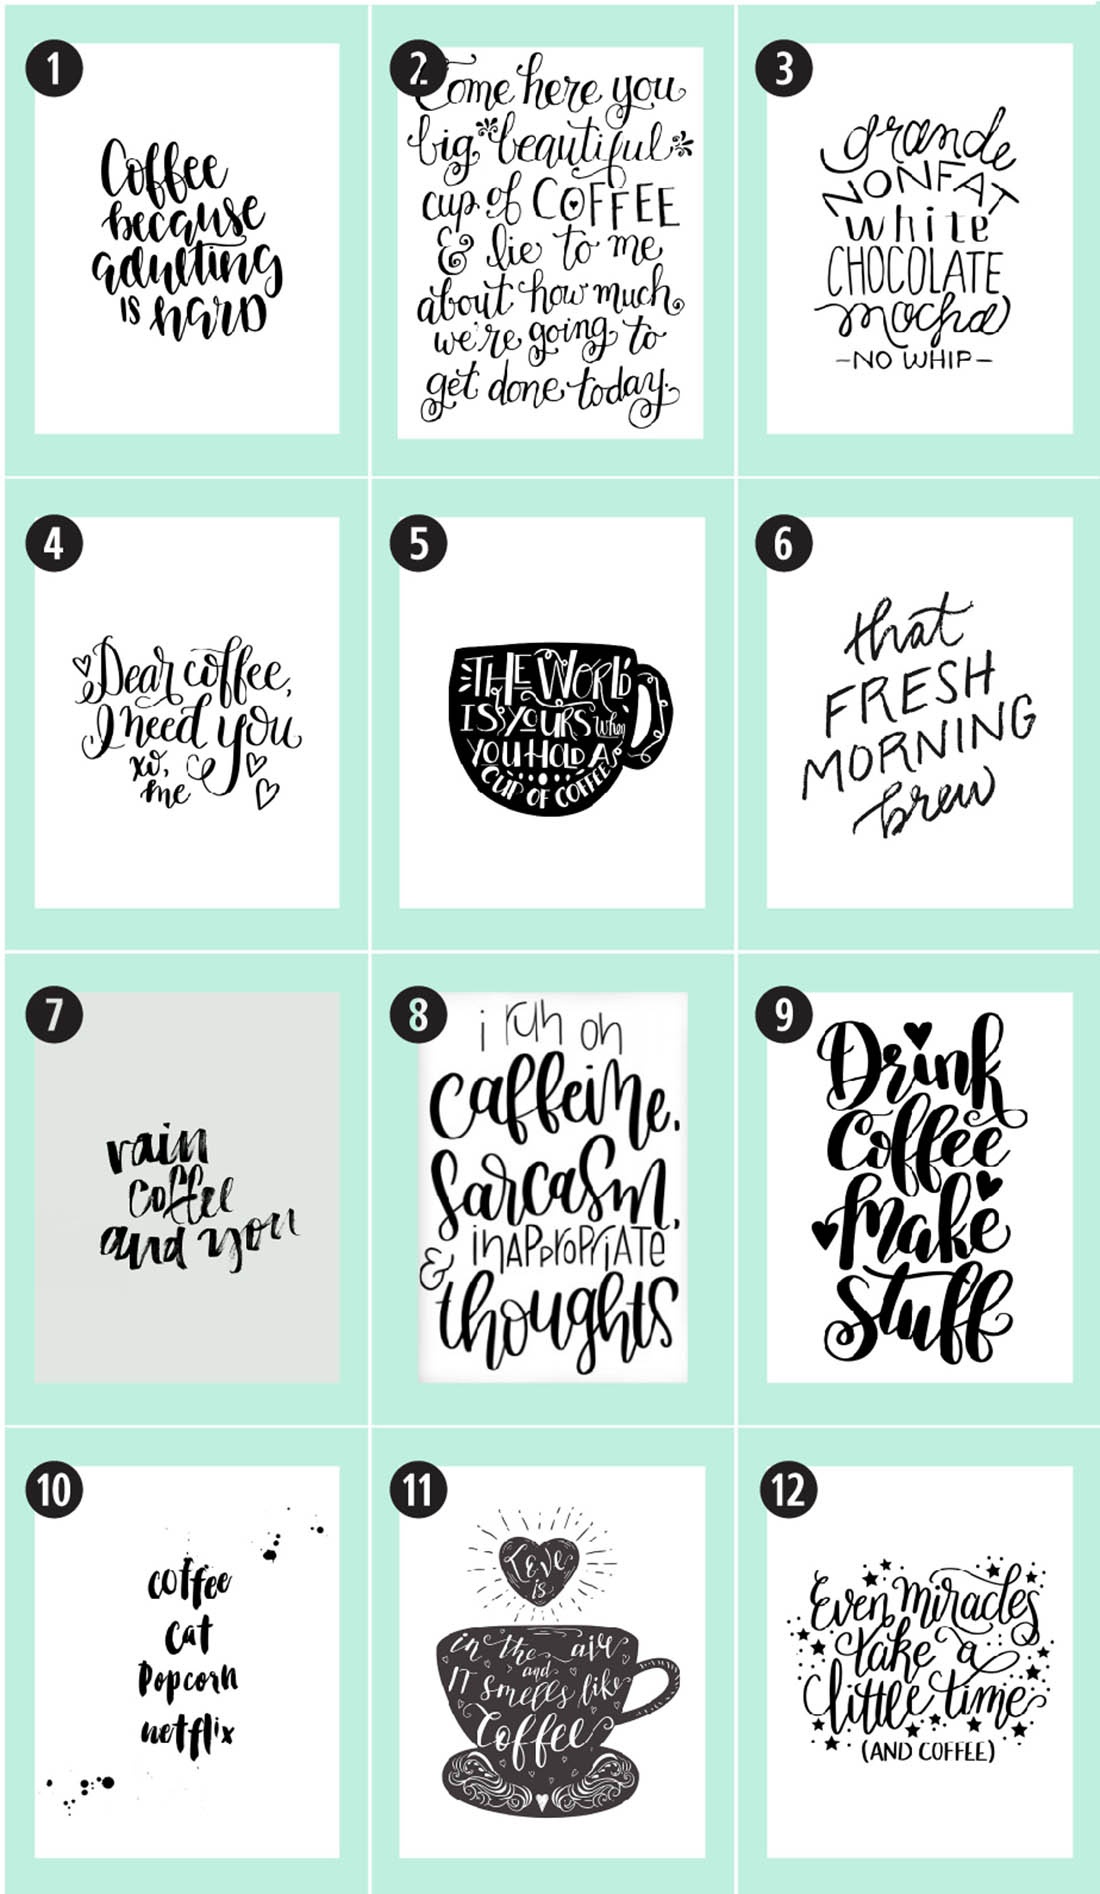 Coffee Free Printables: 180+ Ultimate Guide • Little Gold Pixel - Free Printable Coffee Bar Signs